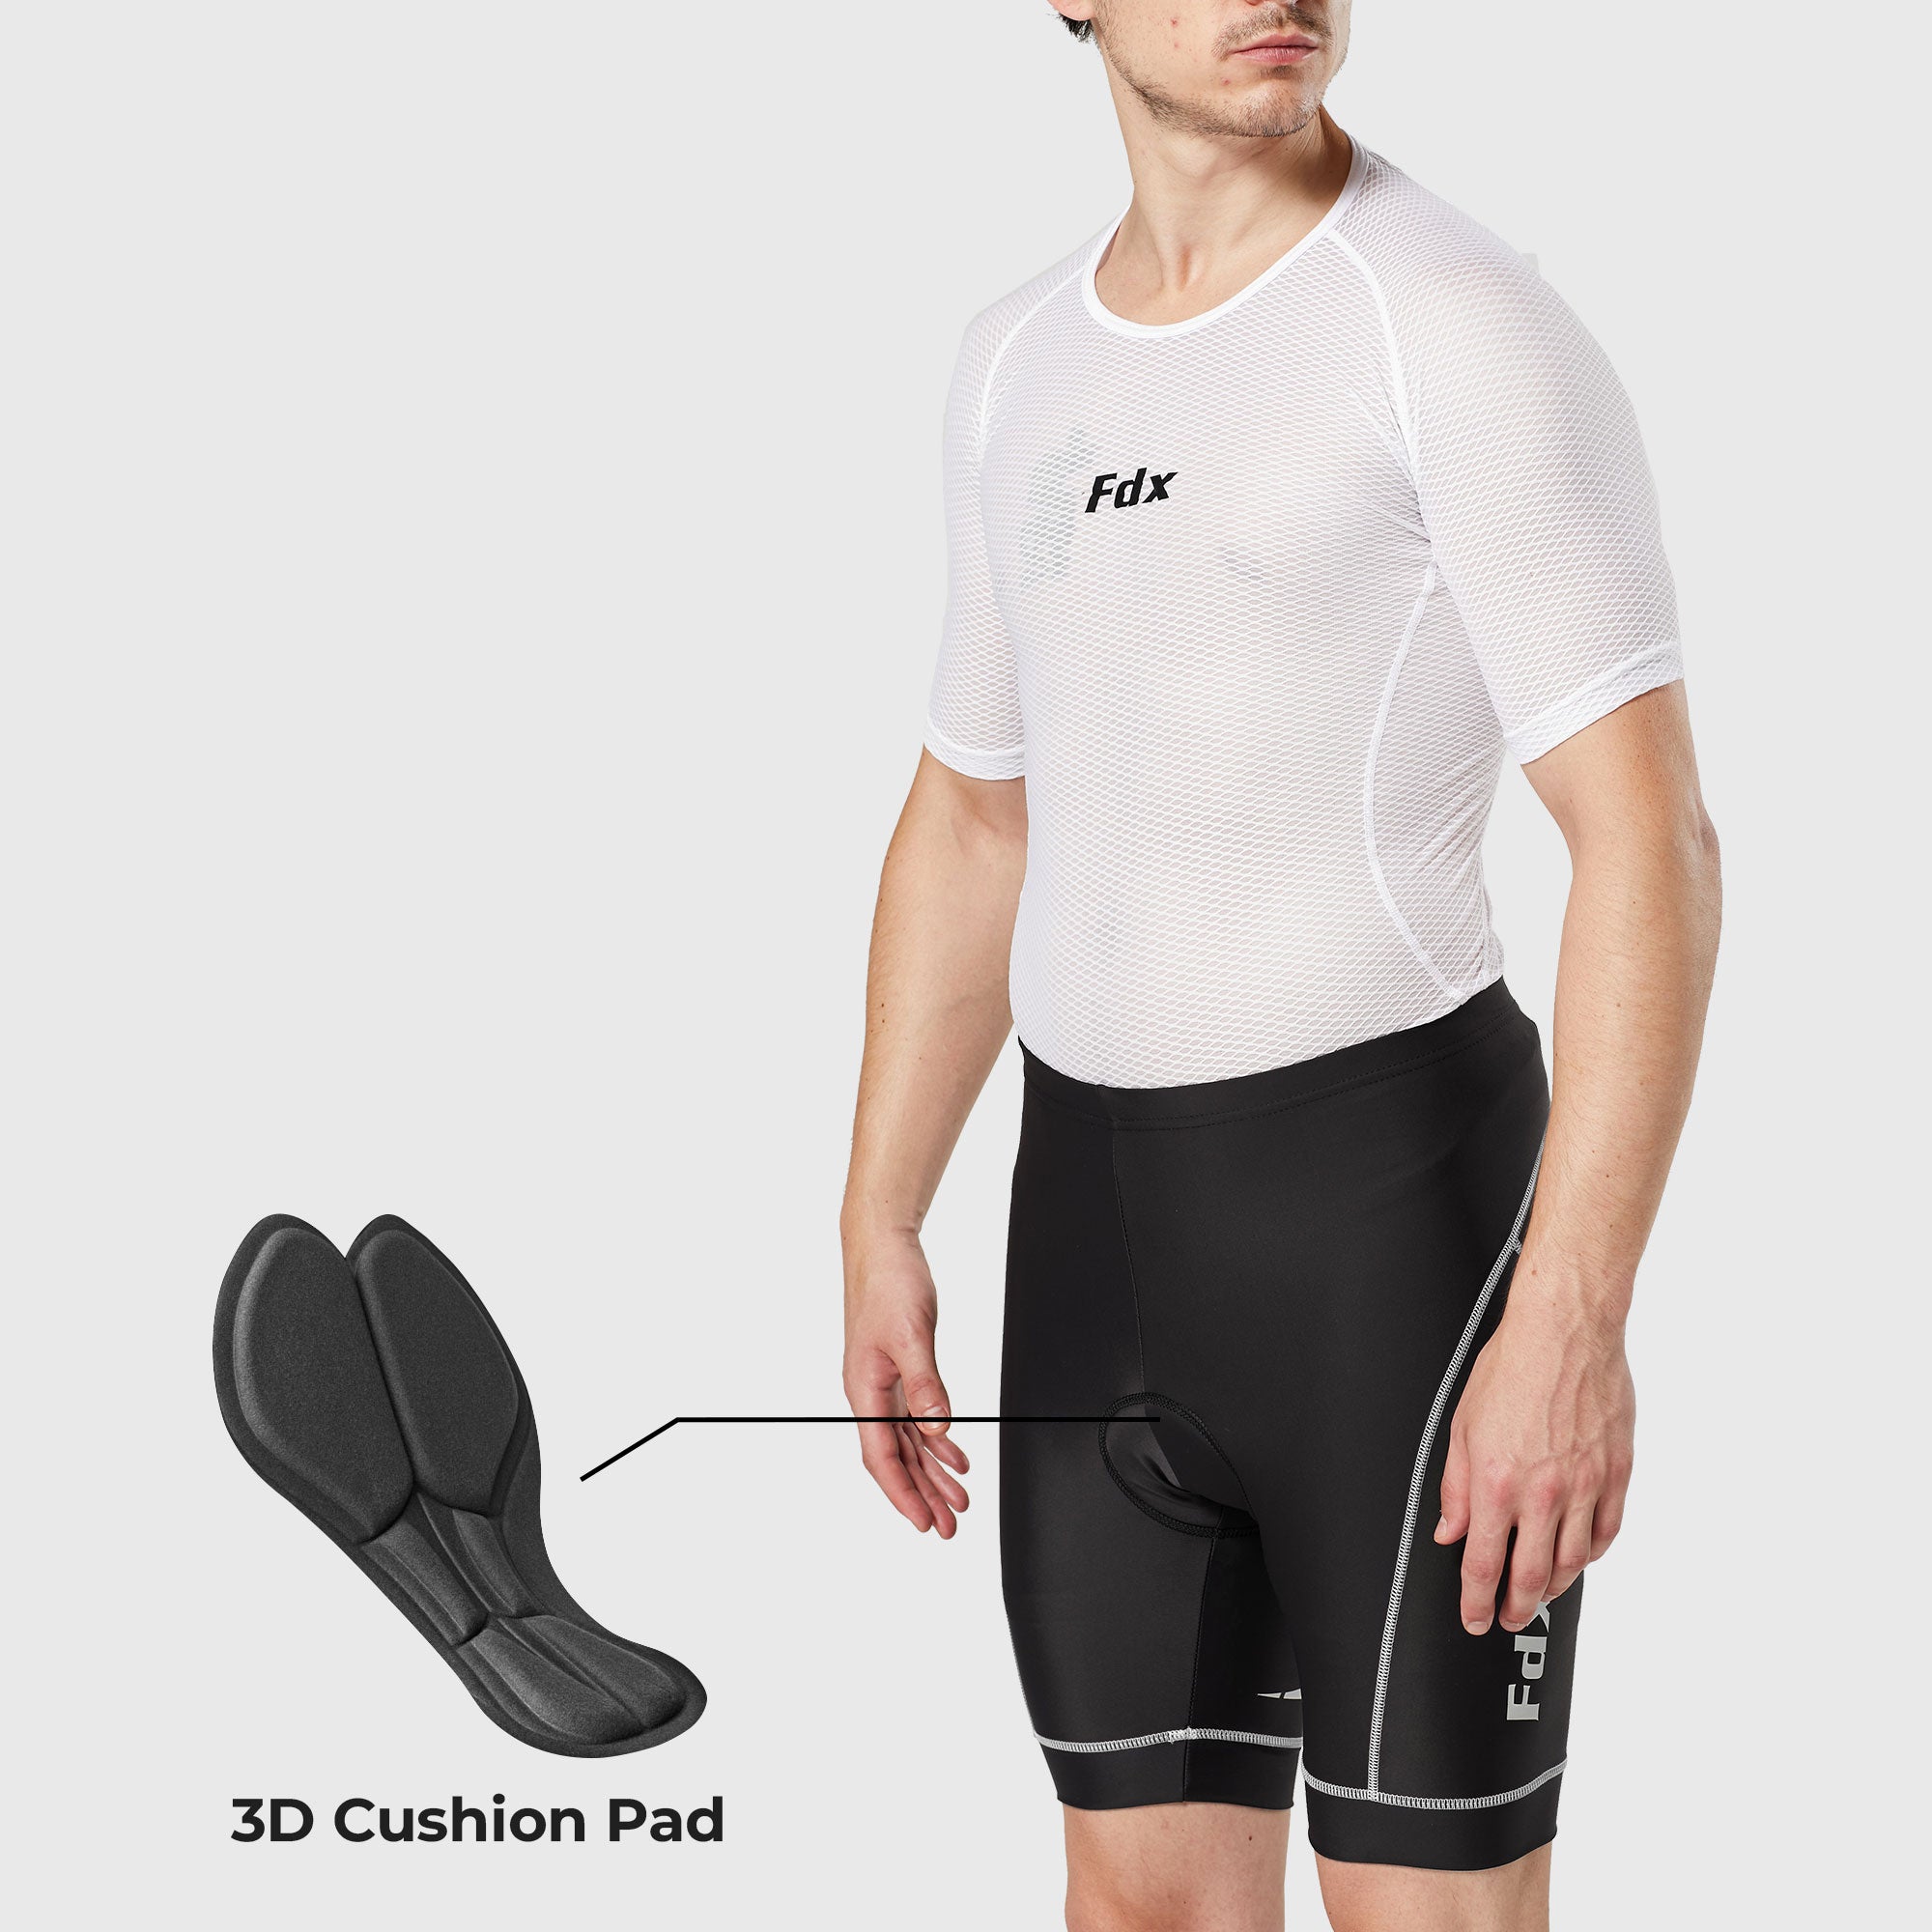 Fdx Mens Black & White Gel Padded Cycling Shorts for Summer Best Outdoor Knickers Road Bike Short Length Pants - Ridest